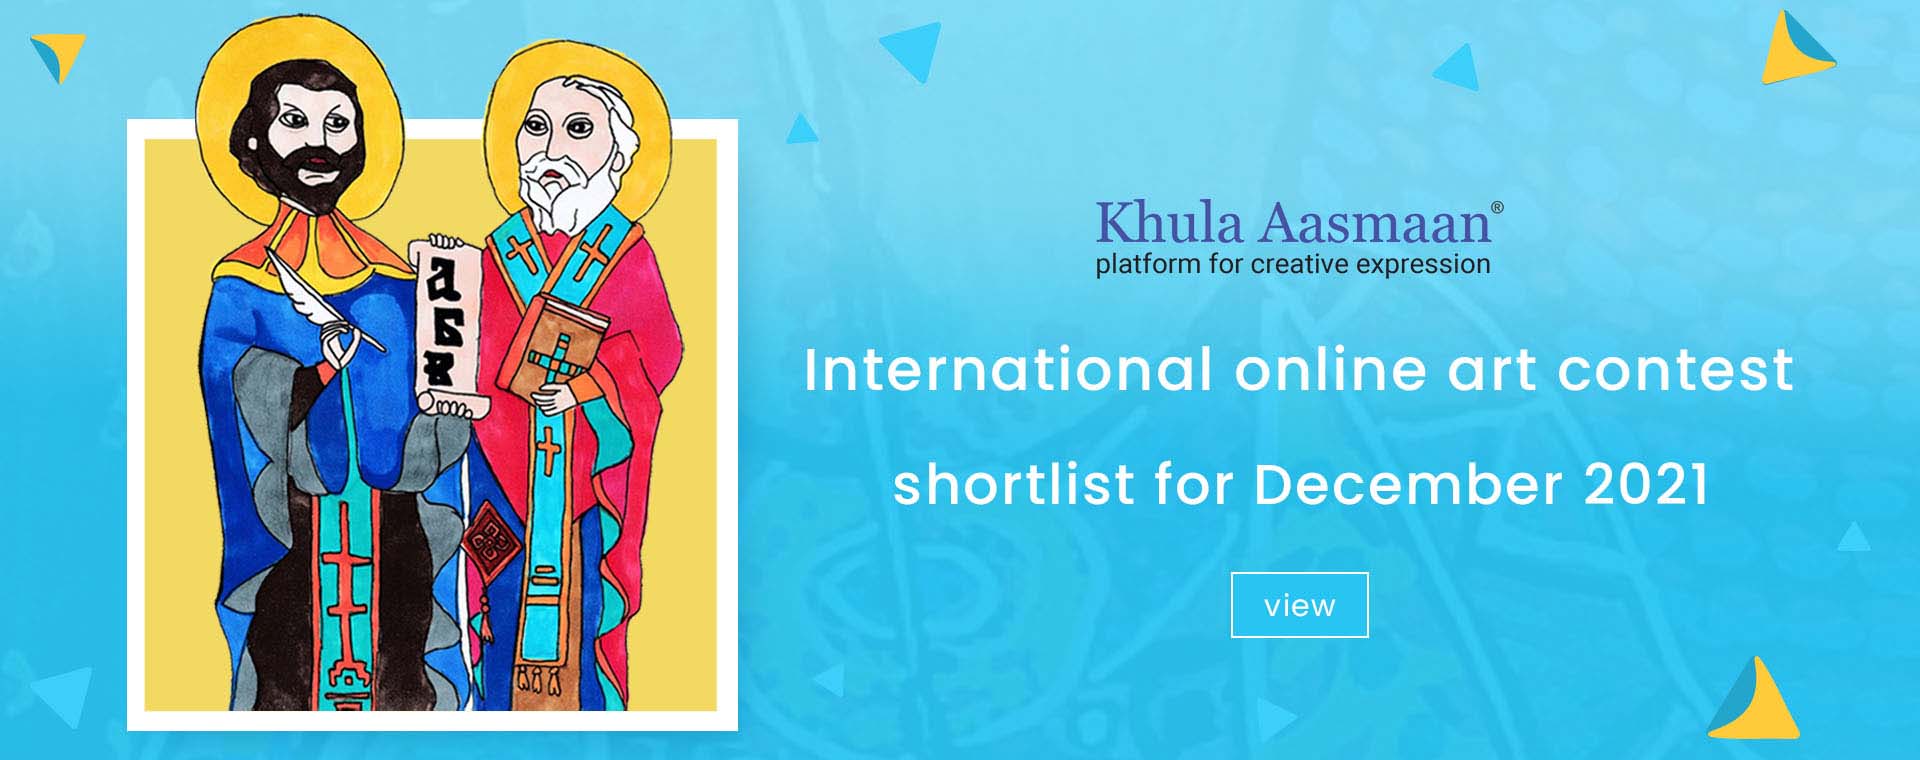 Shortlist for Khula Aasmaan art contest from December 2021